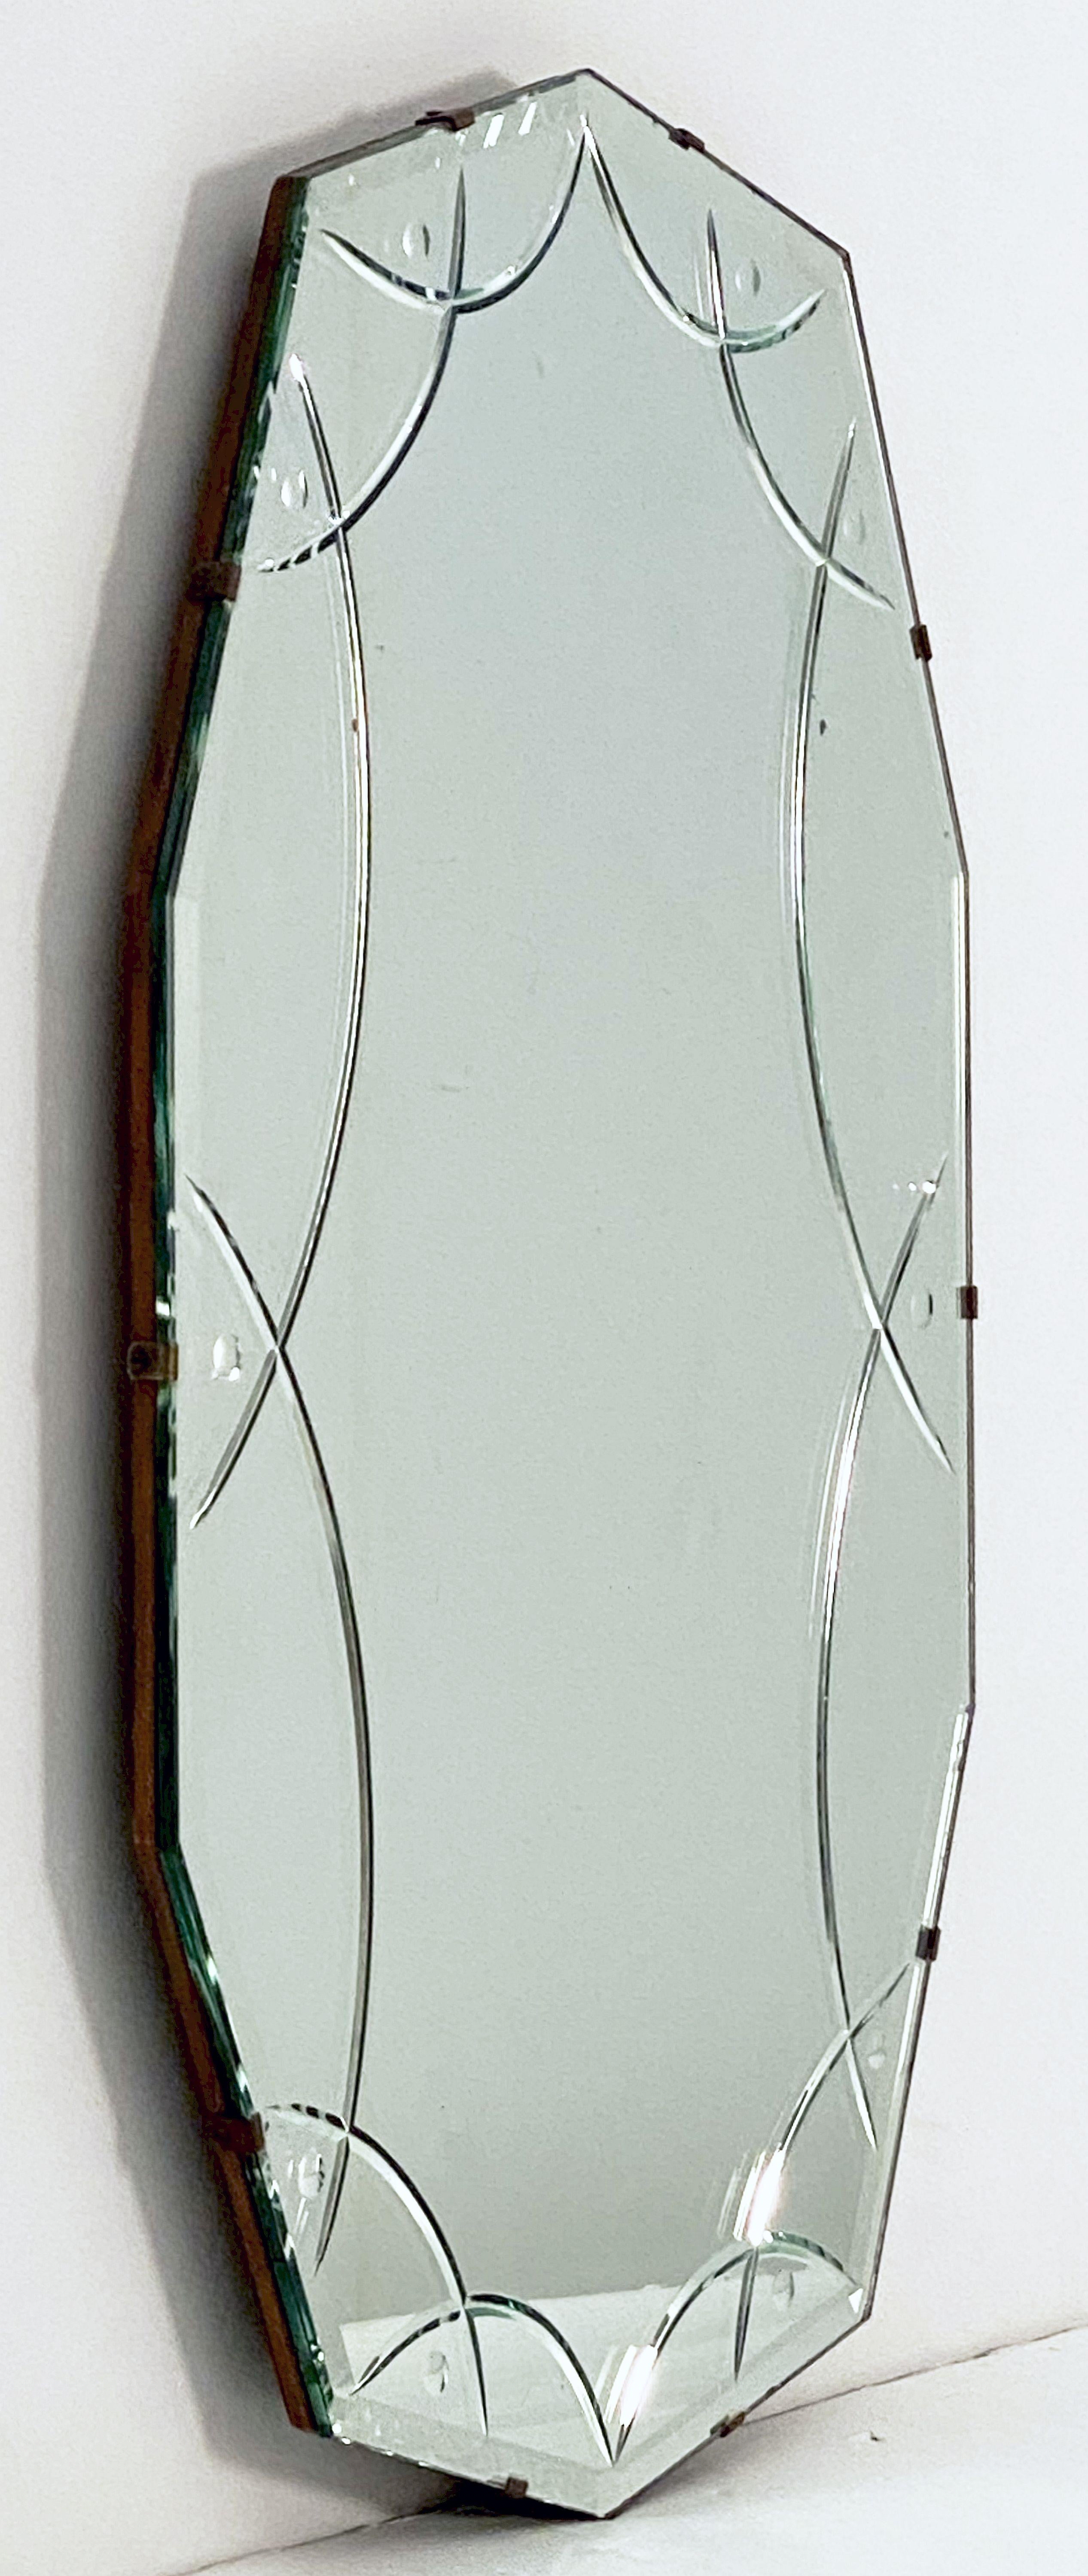 A fine vintage English decagonal or ten-sided oval beveled glass mirror from the Art Deco era featuring a reverse-cut design around the circumference.

With chain to back for vertical (portrait) display 25 1/2 inches x 15 3/8 inches.